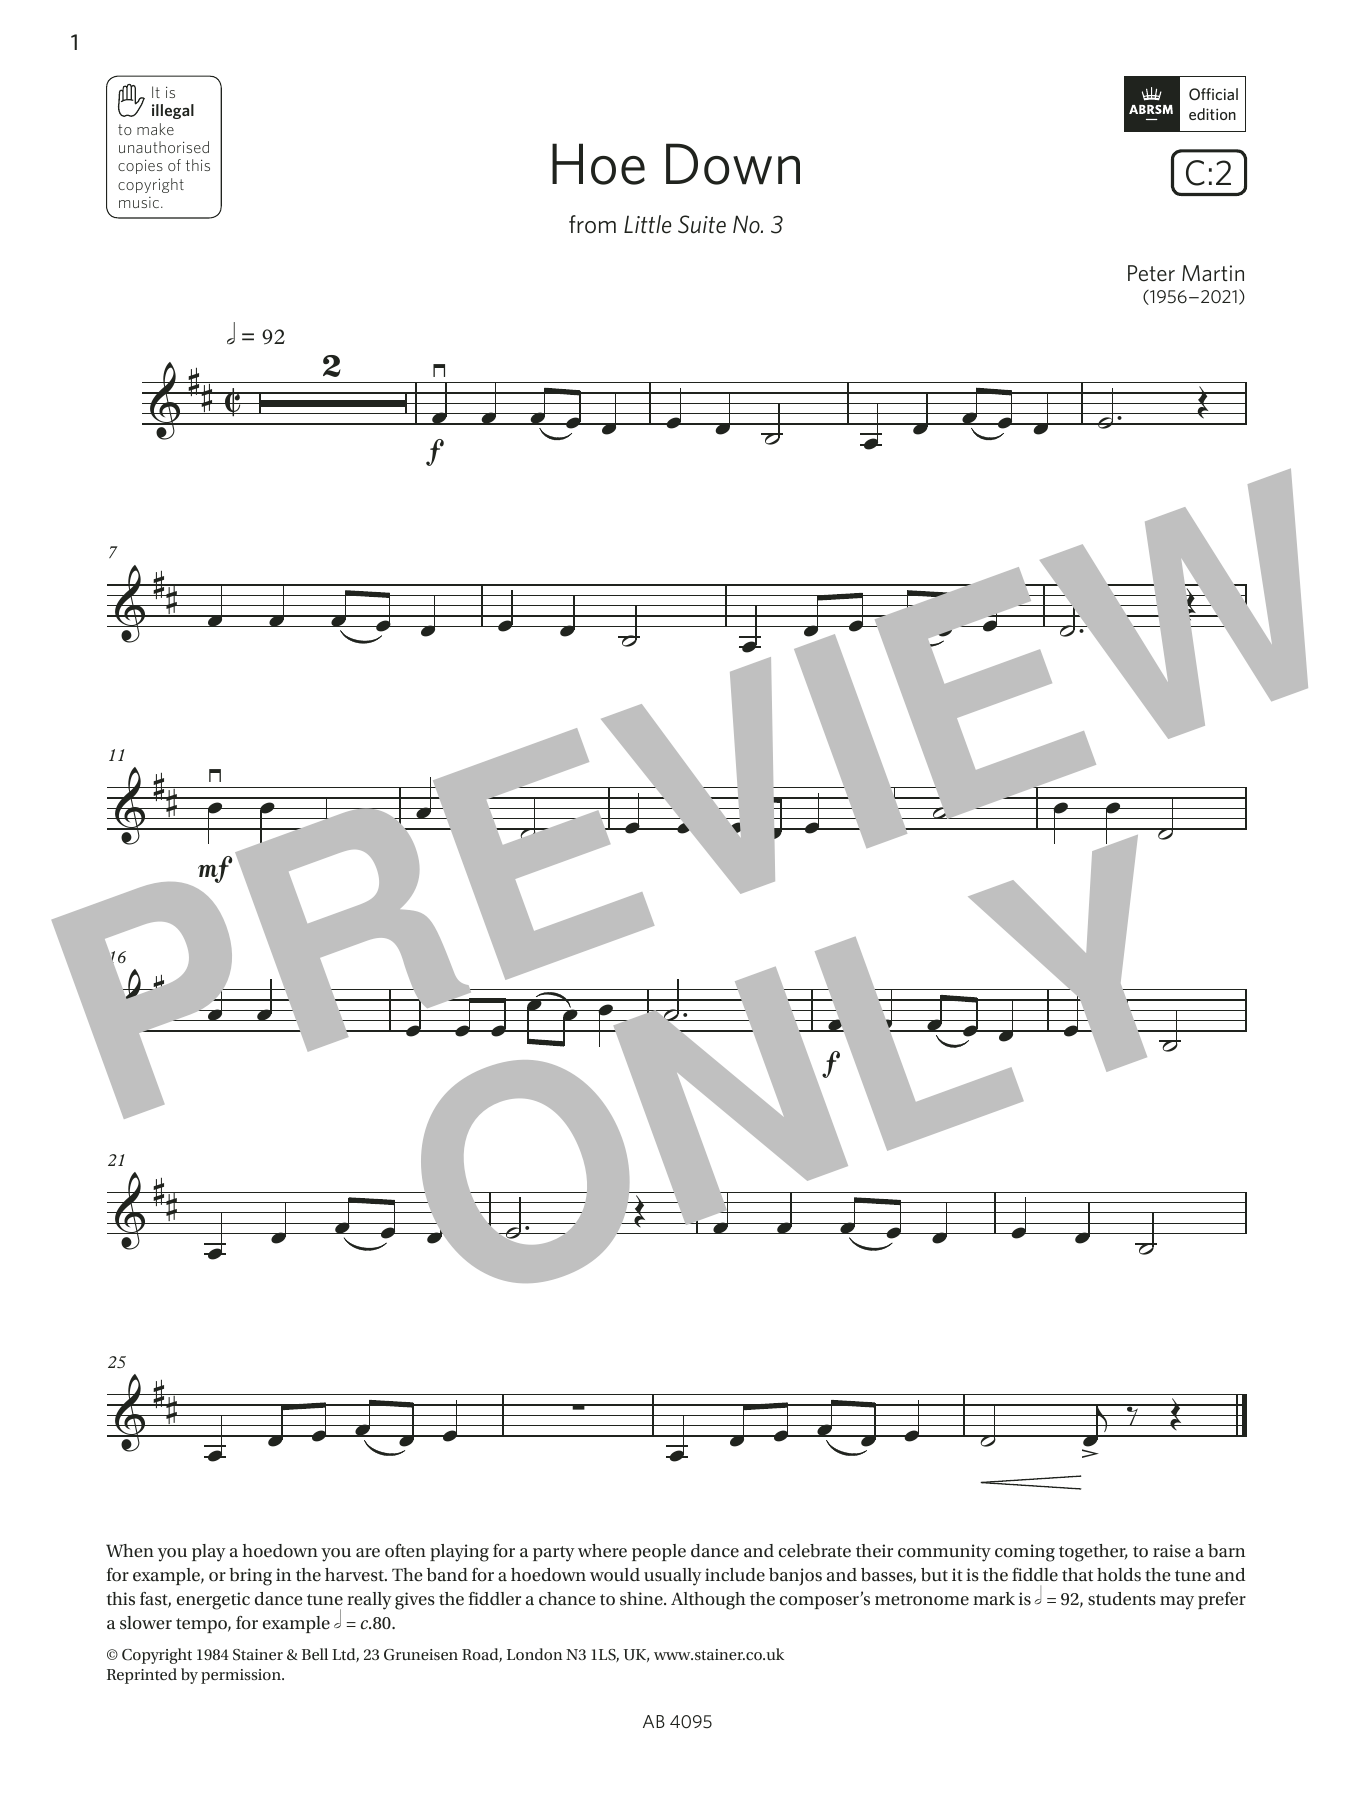 Download Peter Martin Hoe Down (Grade 1, C2, from the ABRSM V Sheet Music